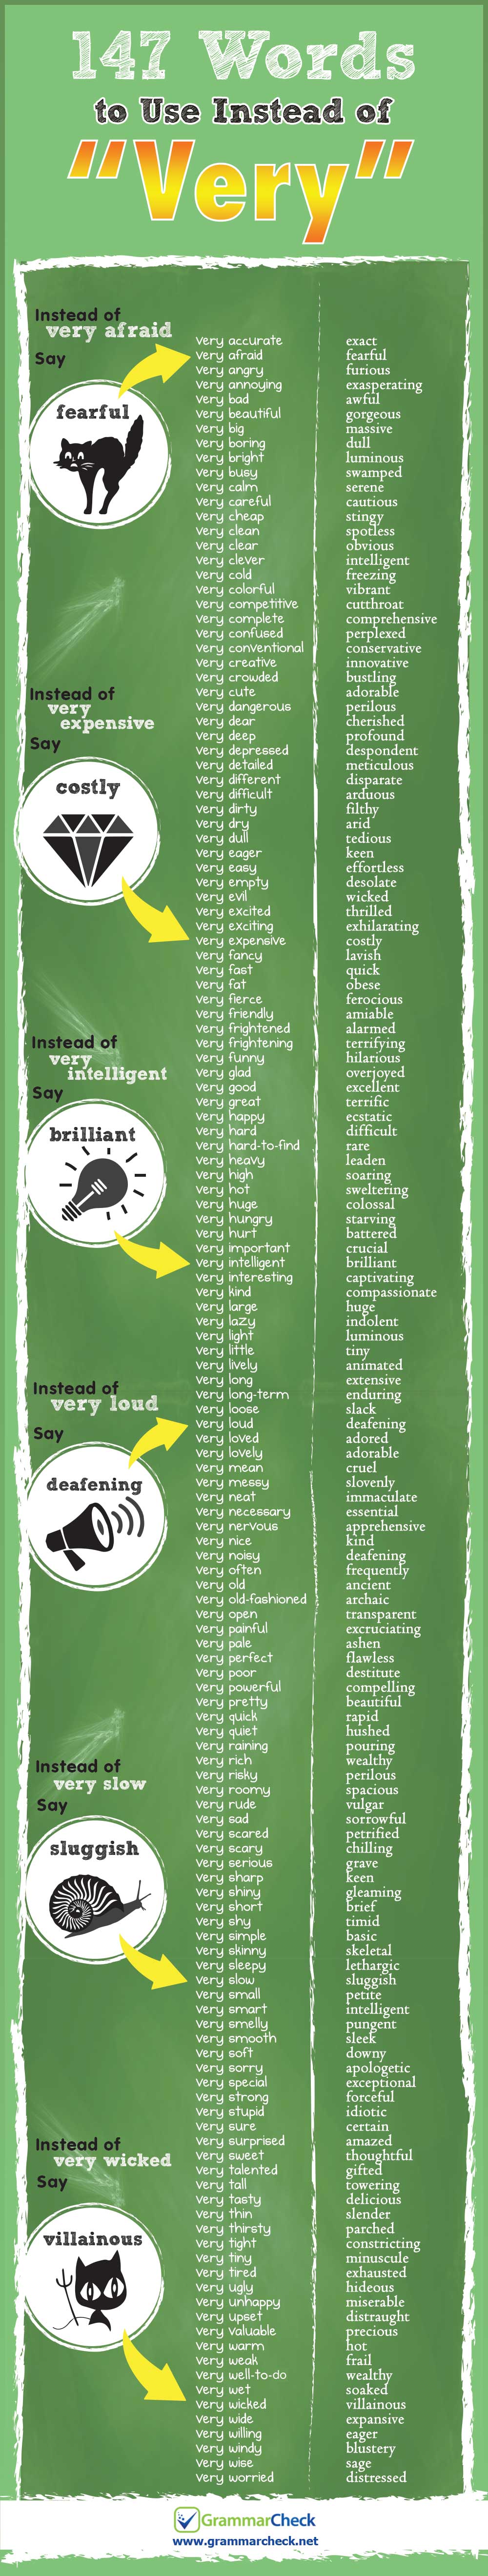 147-words-to-use-instead-of-very-infographic